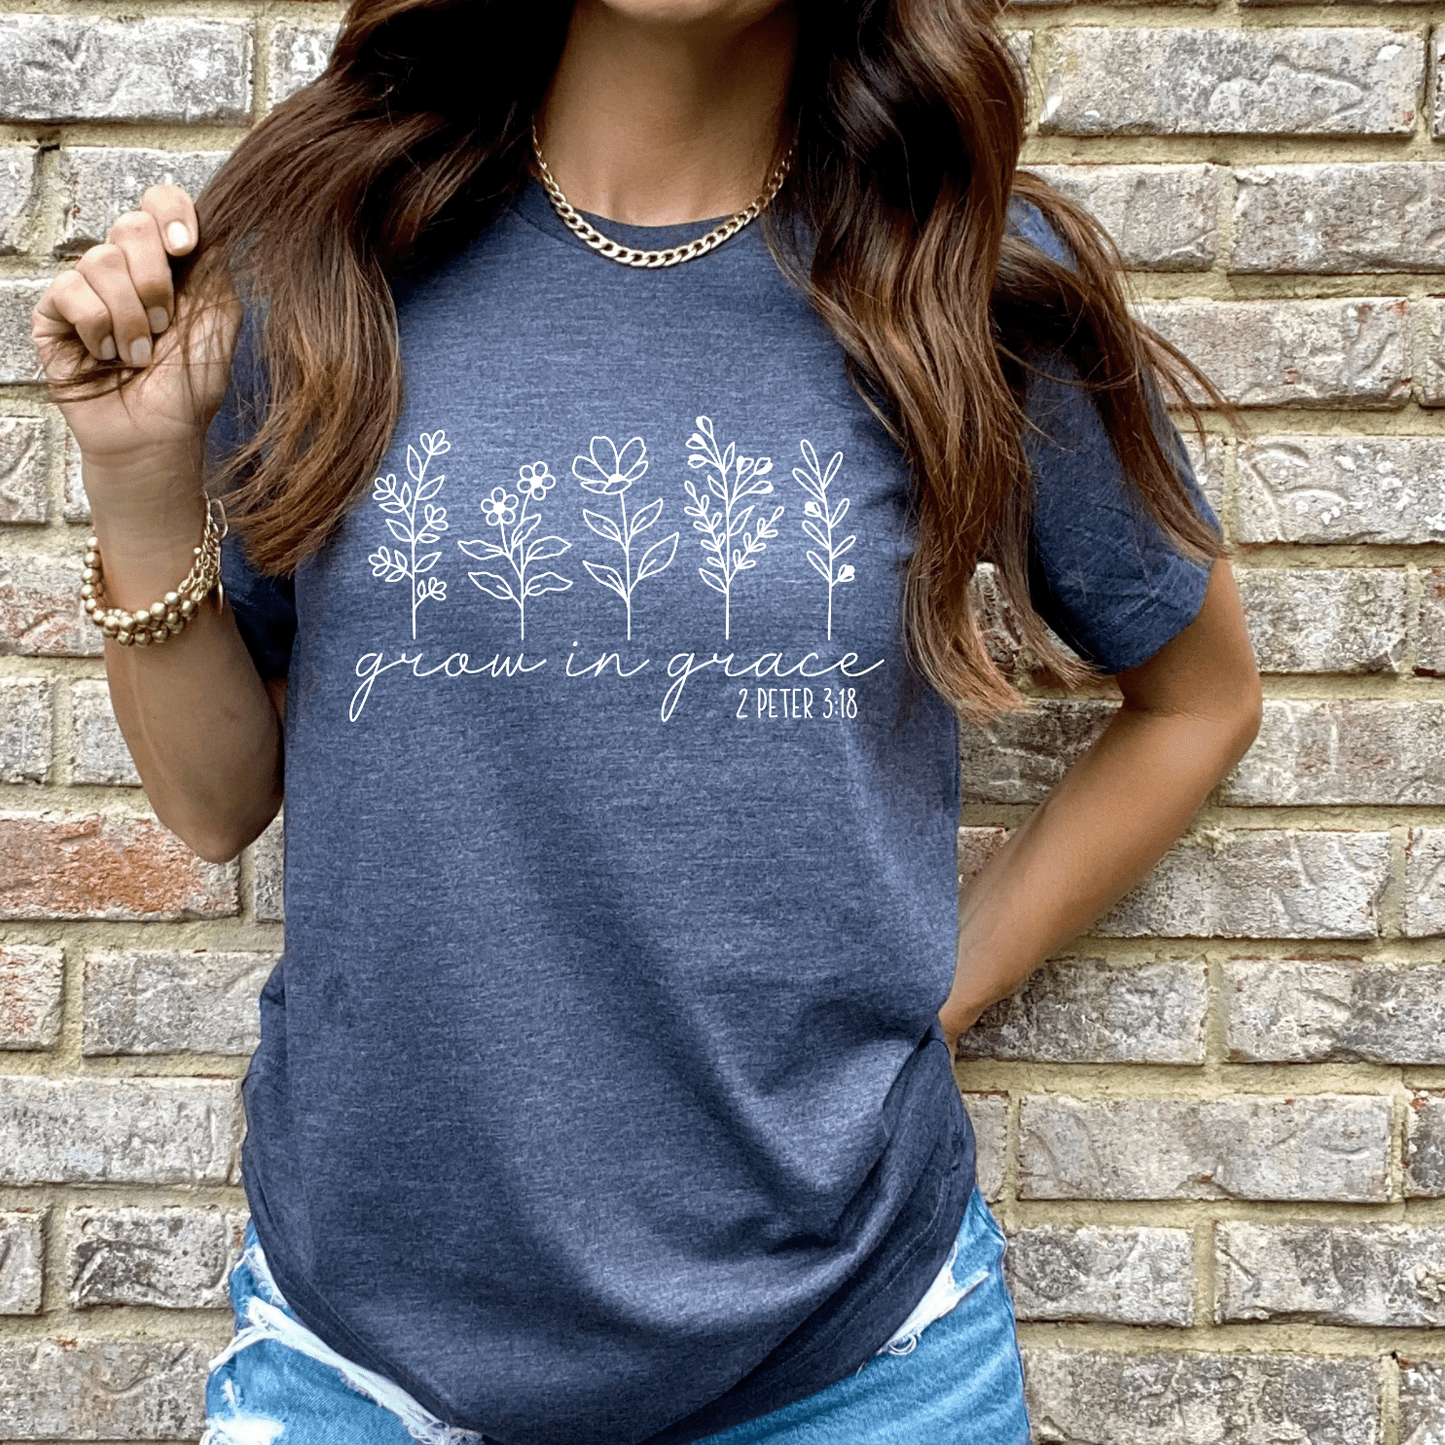 Envy Stylz Boutique Women - Apparel - Shirts - T-Shirts Grow In Grace Graphic Tee